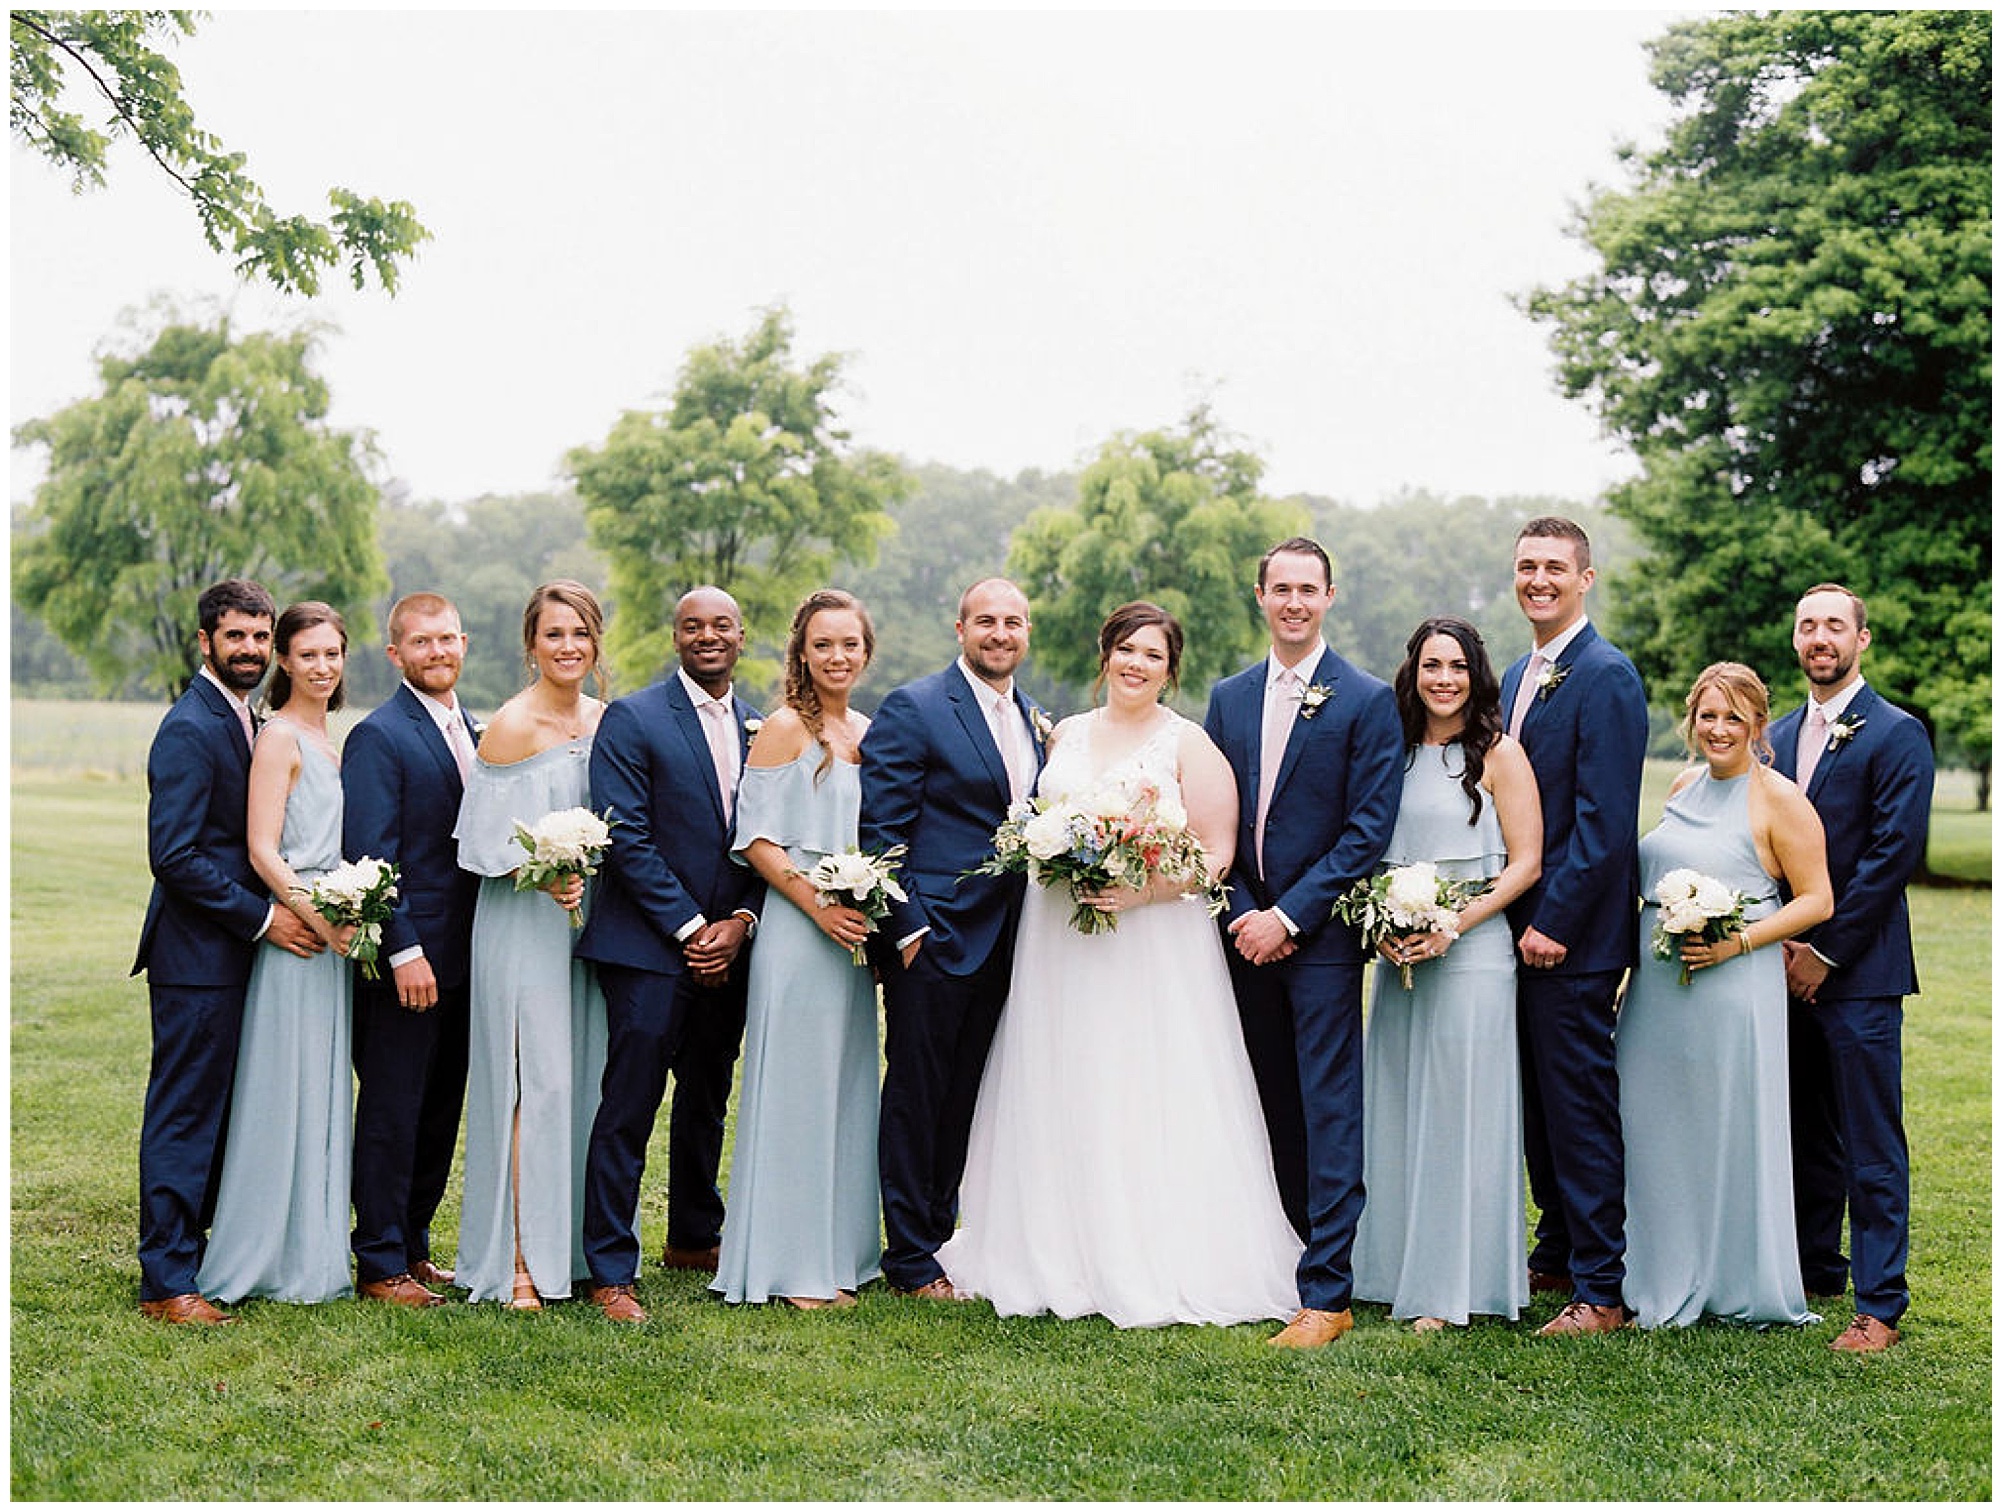 pink and blue wedding color palette and timeless wedding theme for any season now featured on maryland virginia delaware wedding blog, my eastern shore wedding